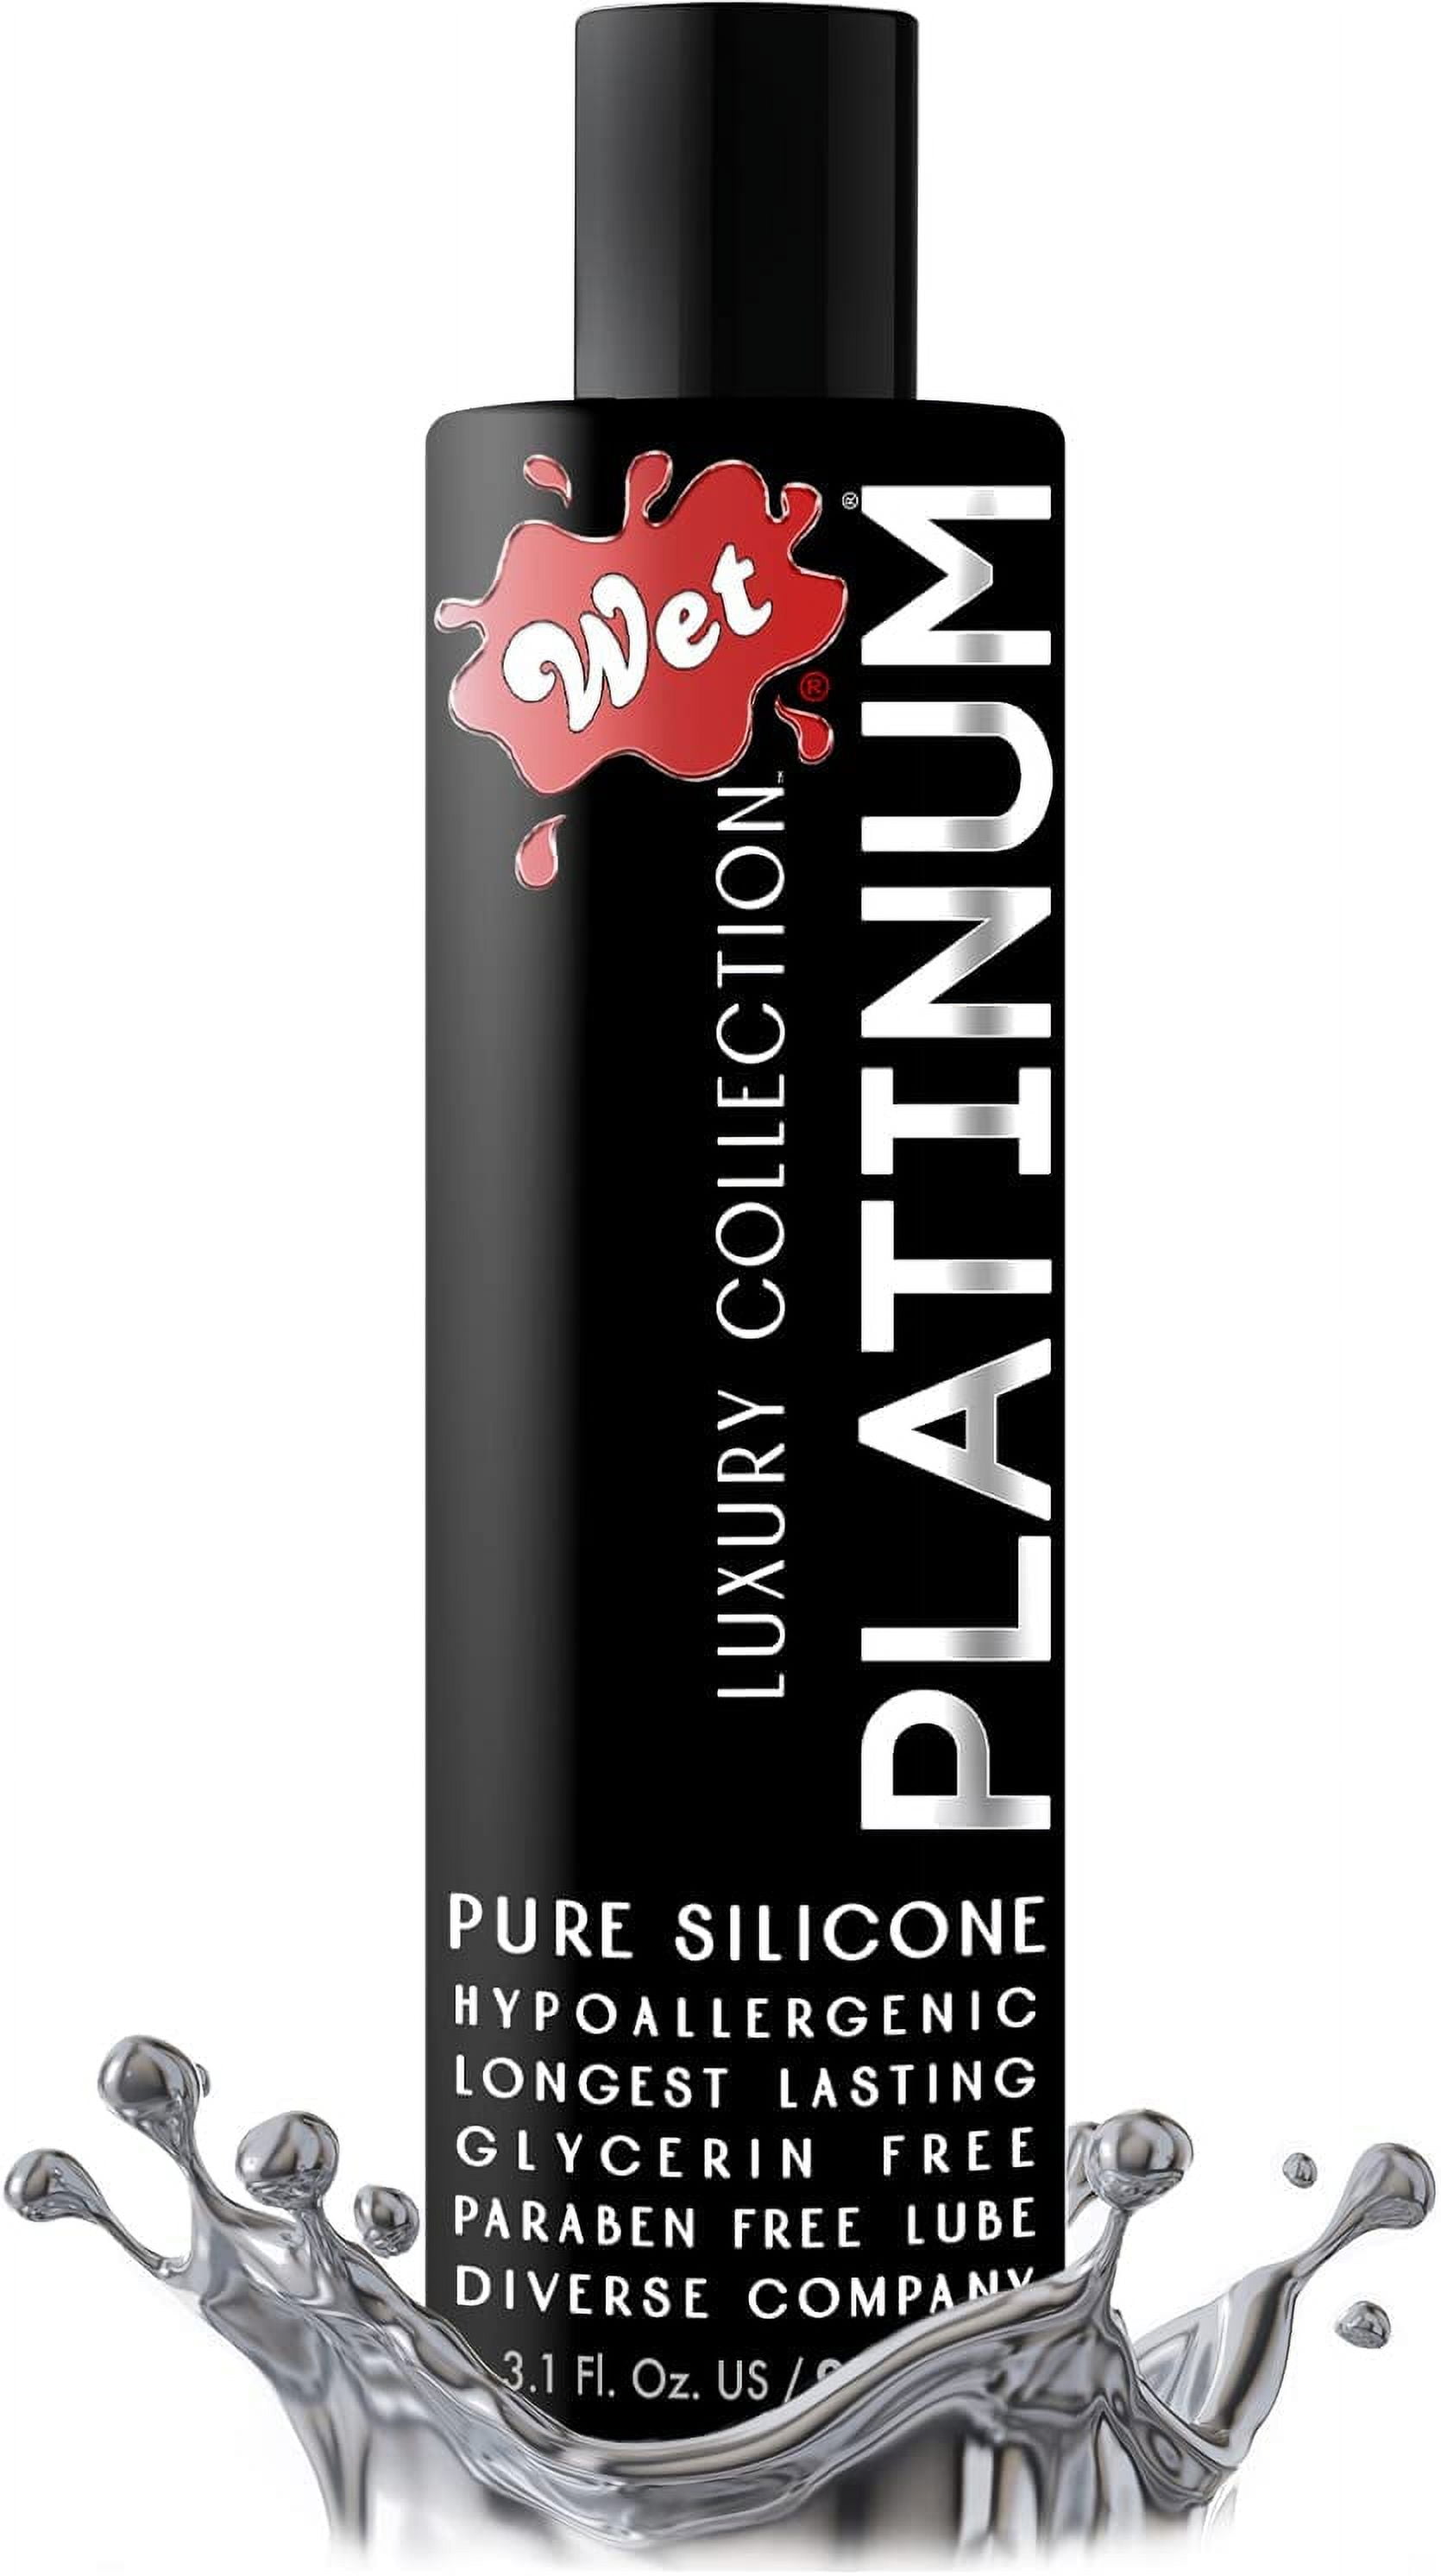 WET Platinum Silicone Based Lubricant, 3.1 Ounce